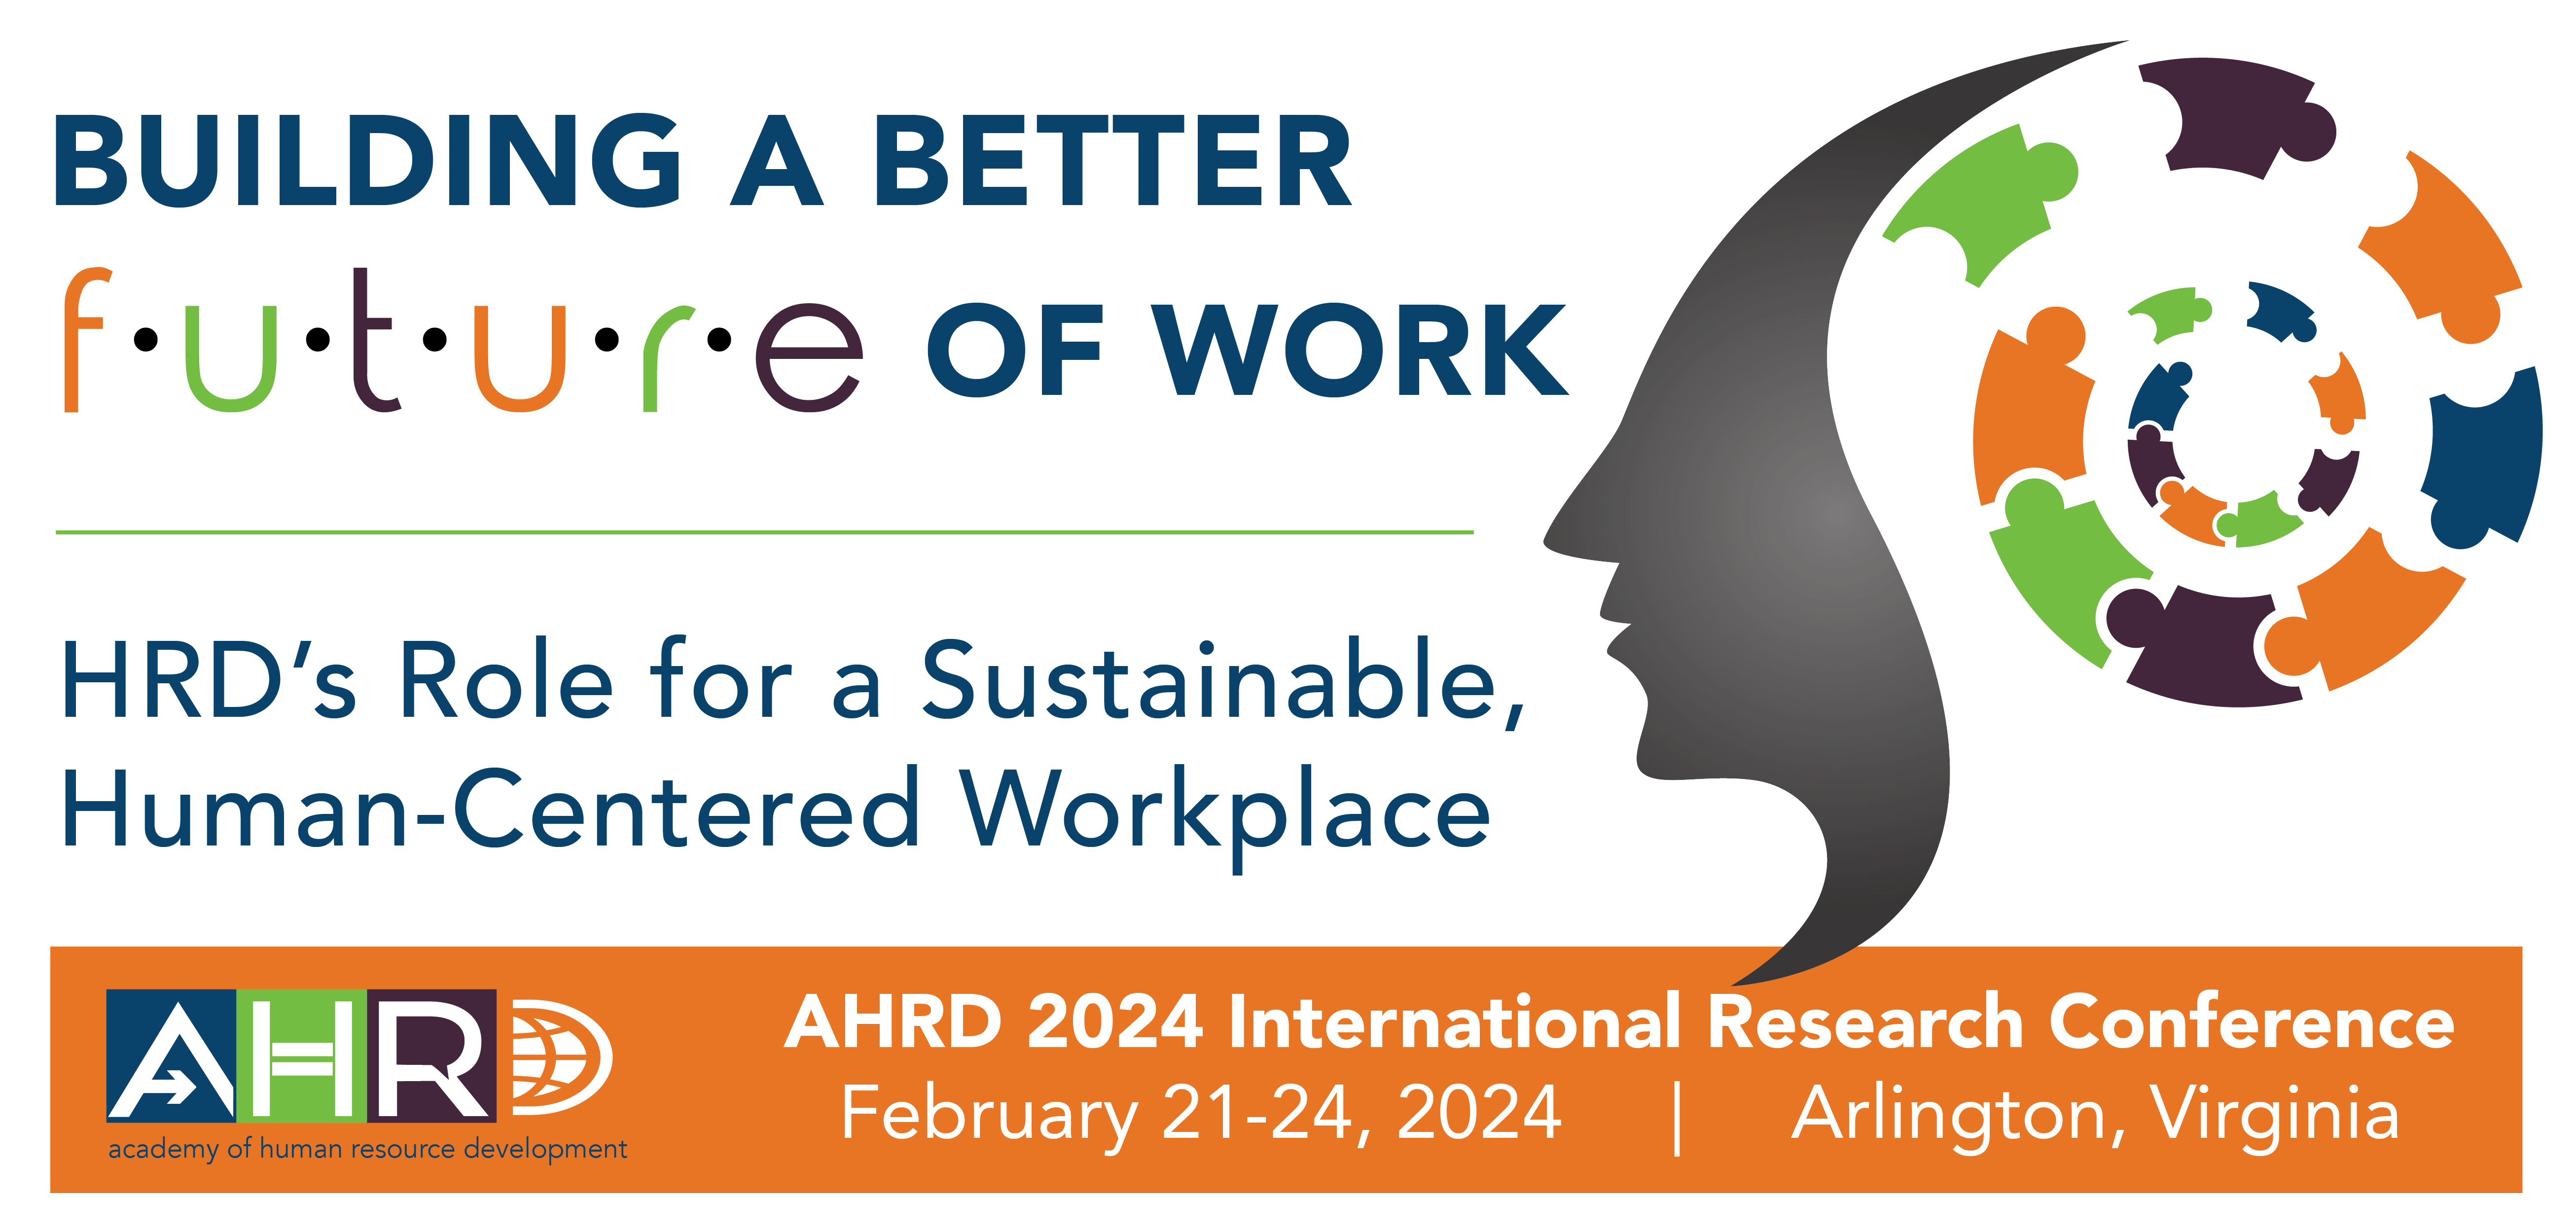 2024 AHRD International Research Conference in the Americas